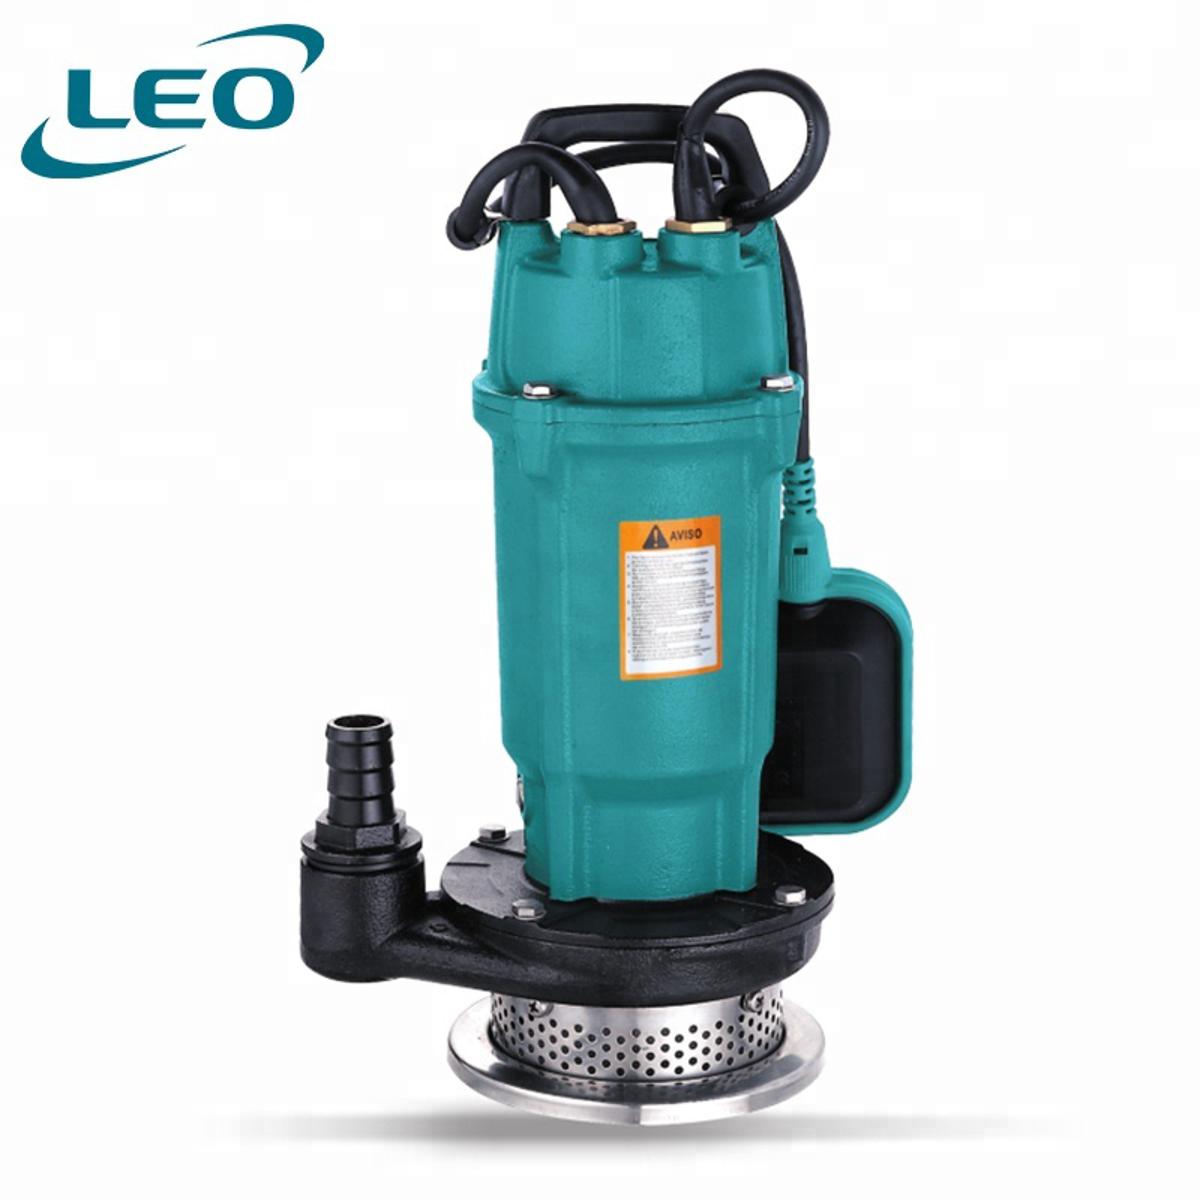 LEO - QDX-1.5-32-0.75A - 750 W - 1 HP  HIGH PRESSURE CAST IRON Submersible Pump With FLOAT SWITCH FOR AUTOMATIC OPERATION - European STANDARD